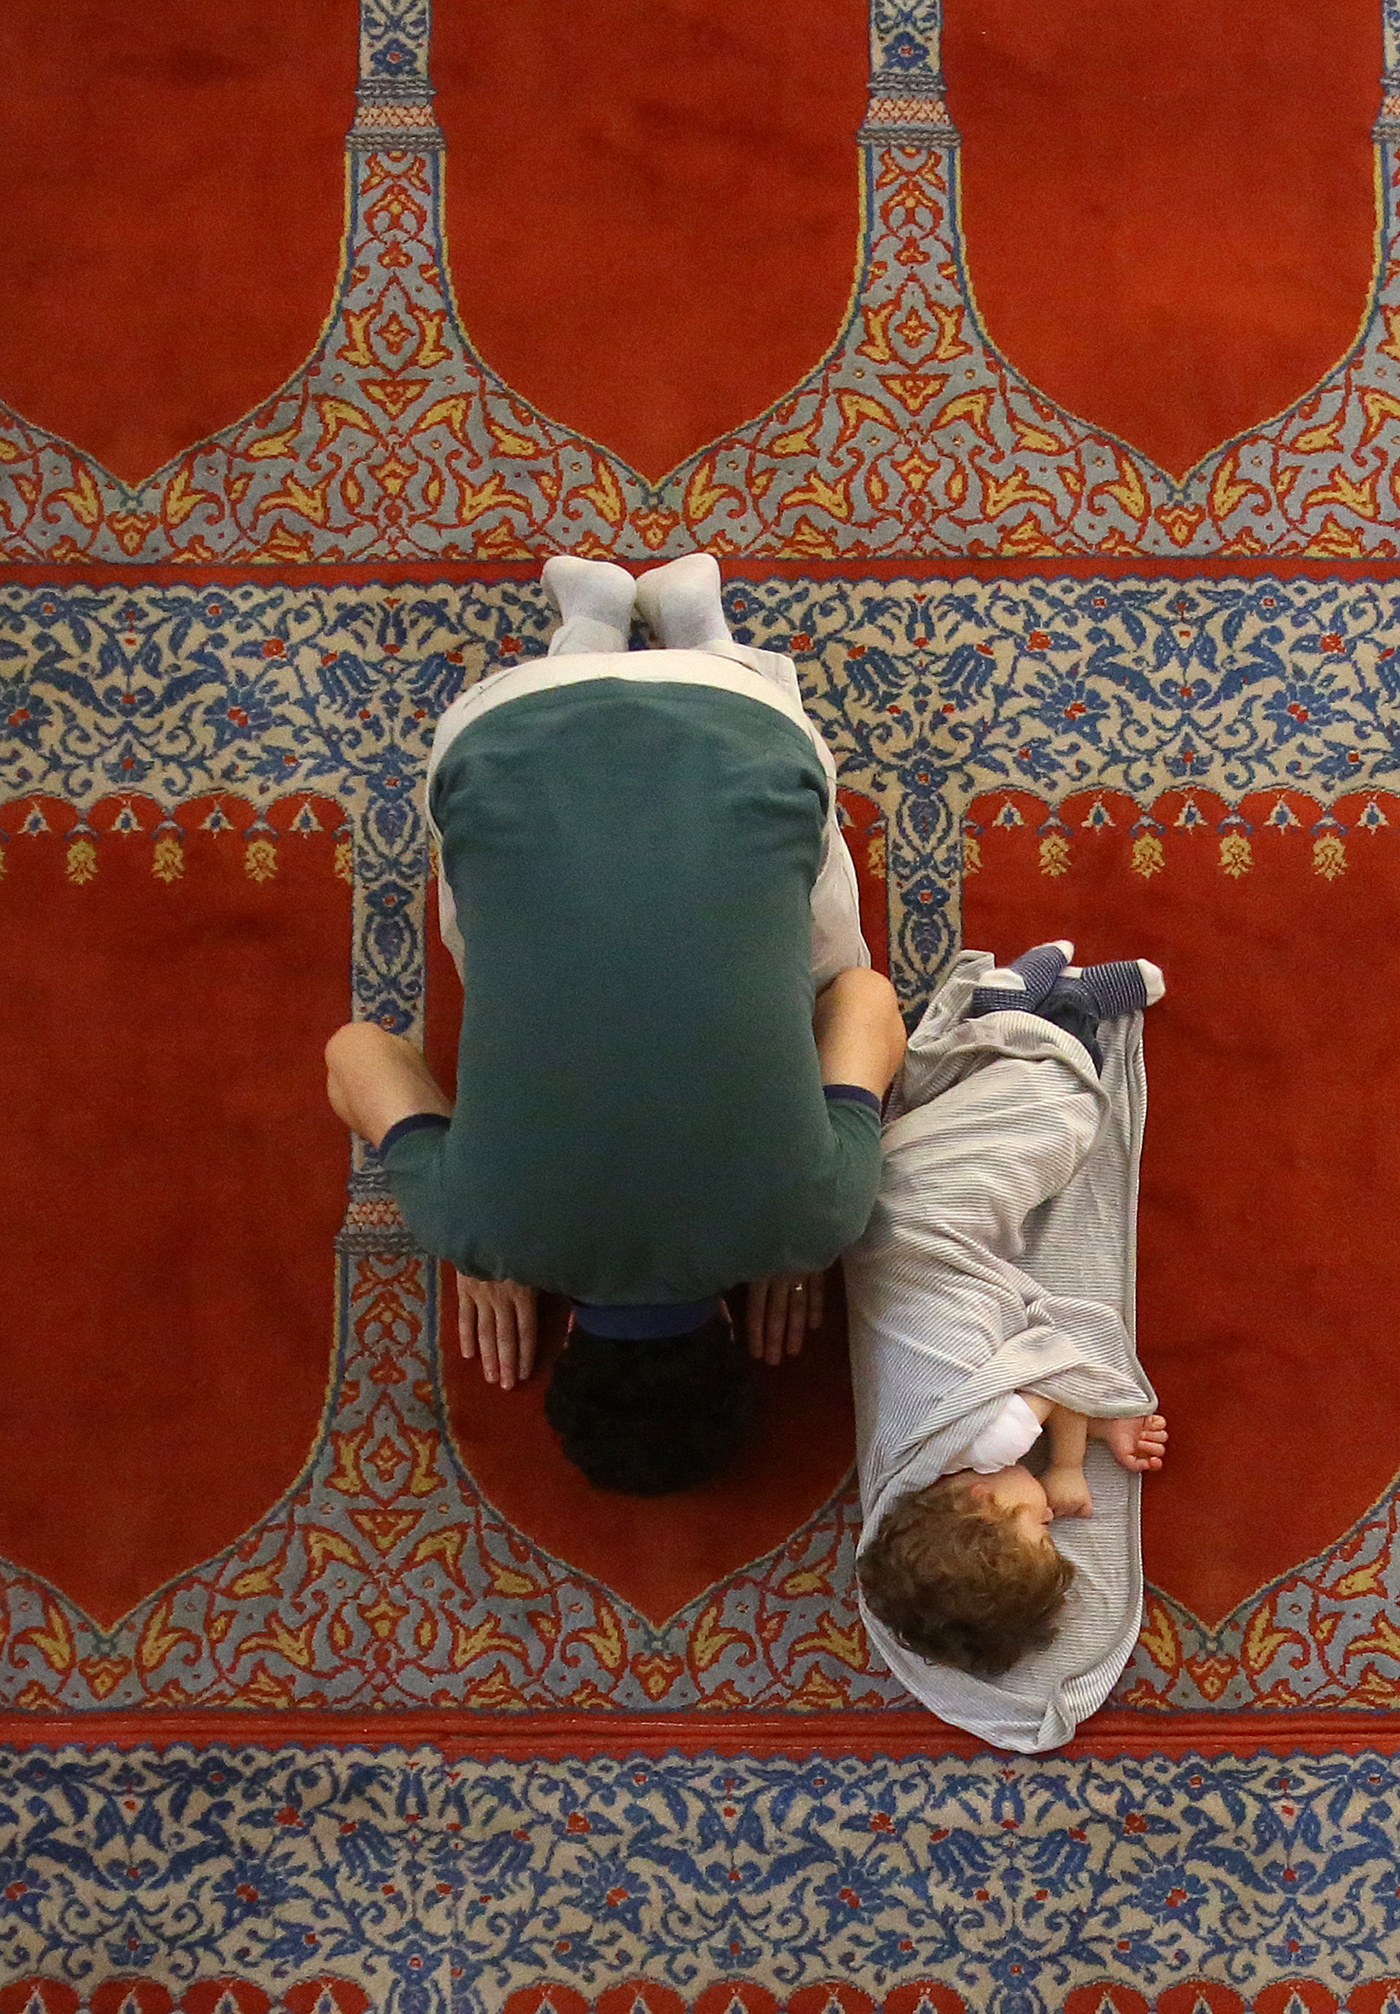 Turkish Muslims pray at the Suleymaniye Mosque on first day of the Eid-al-Adha in Istanbul, Turkey, 01 September 2017. Millions of Muslims around the world are preparing to celebrate the Eid al-Adha feast, or Kurban Bayrami in Turkey, when they will slaughter cattle, goats and sheep in commemoration of the Prophet Abraham